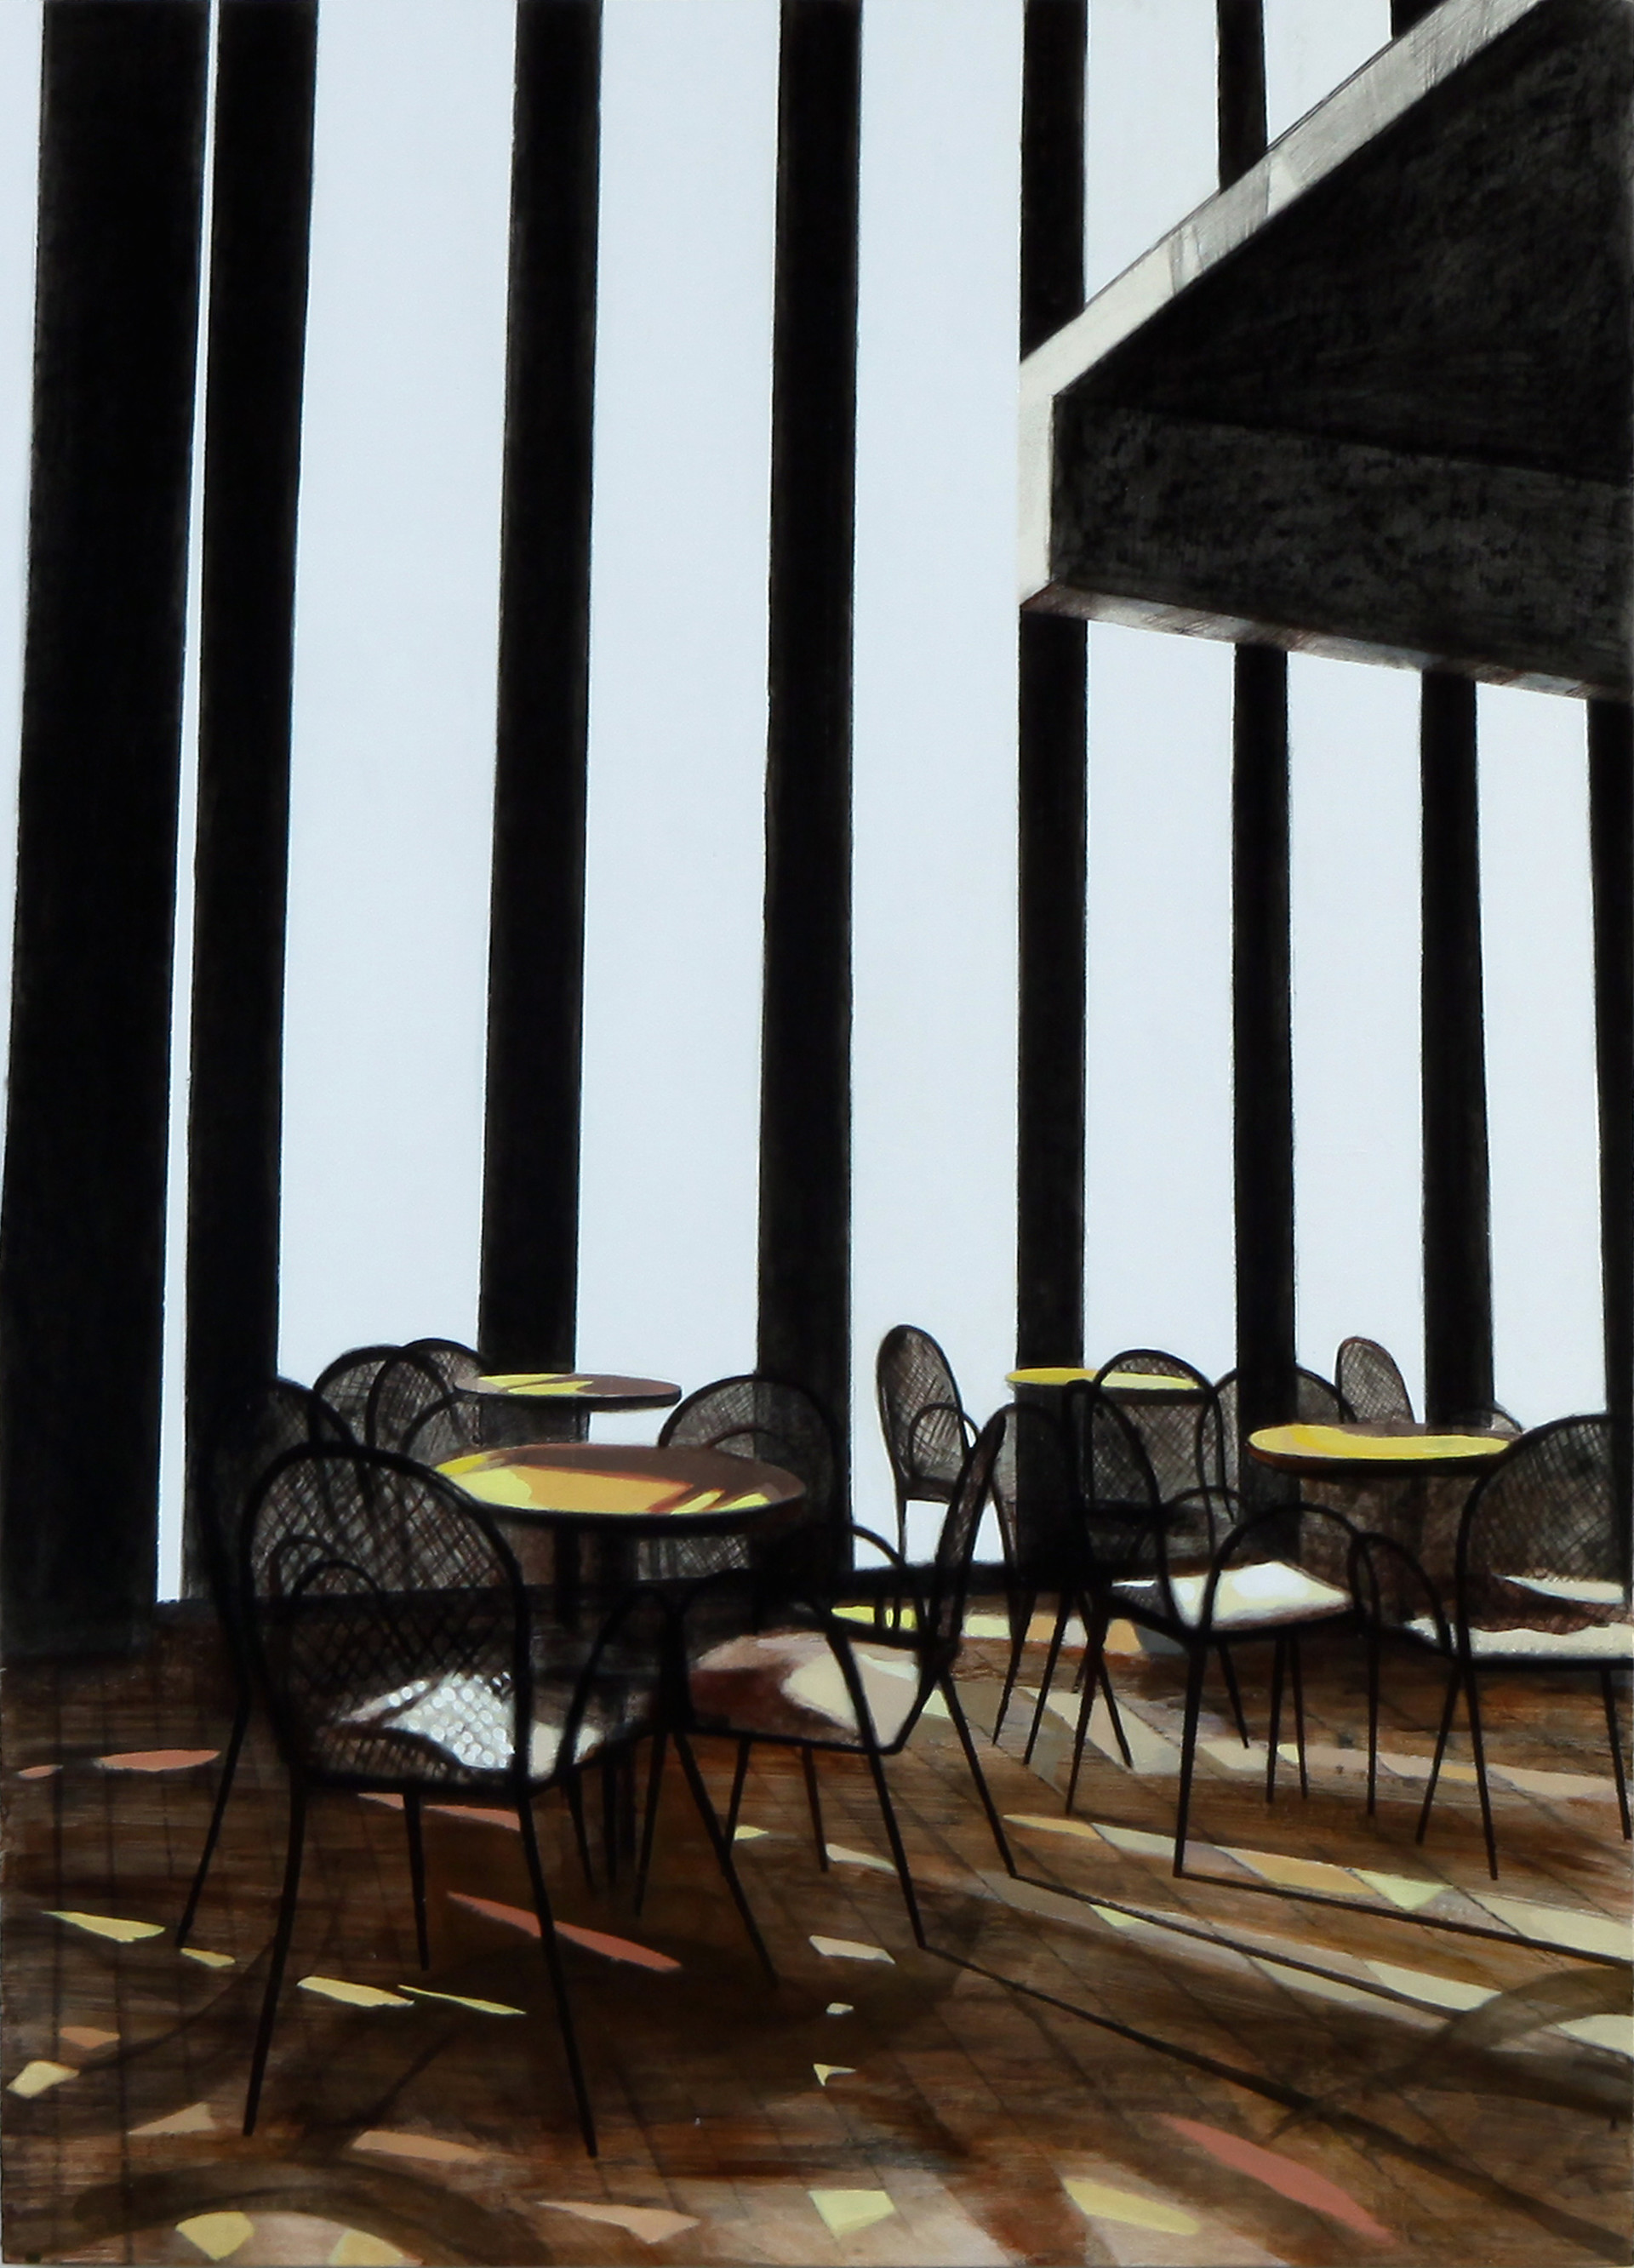 cafe Coffee Smith, conte on hardboard, mixed media,120×90cm, 2012